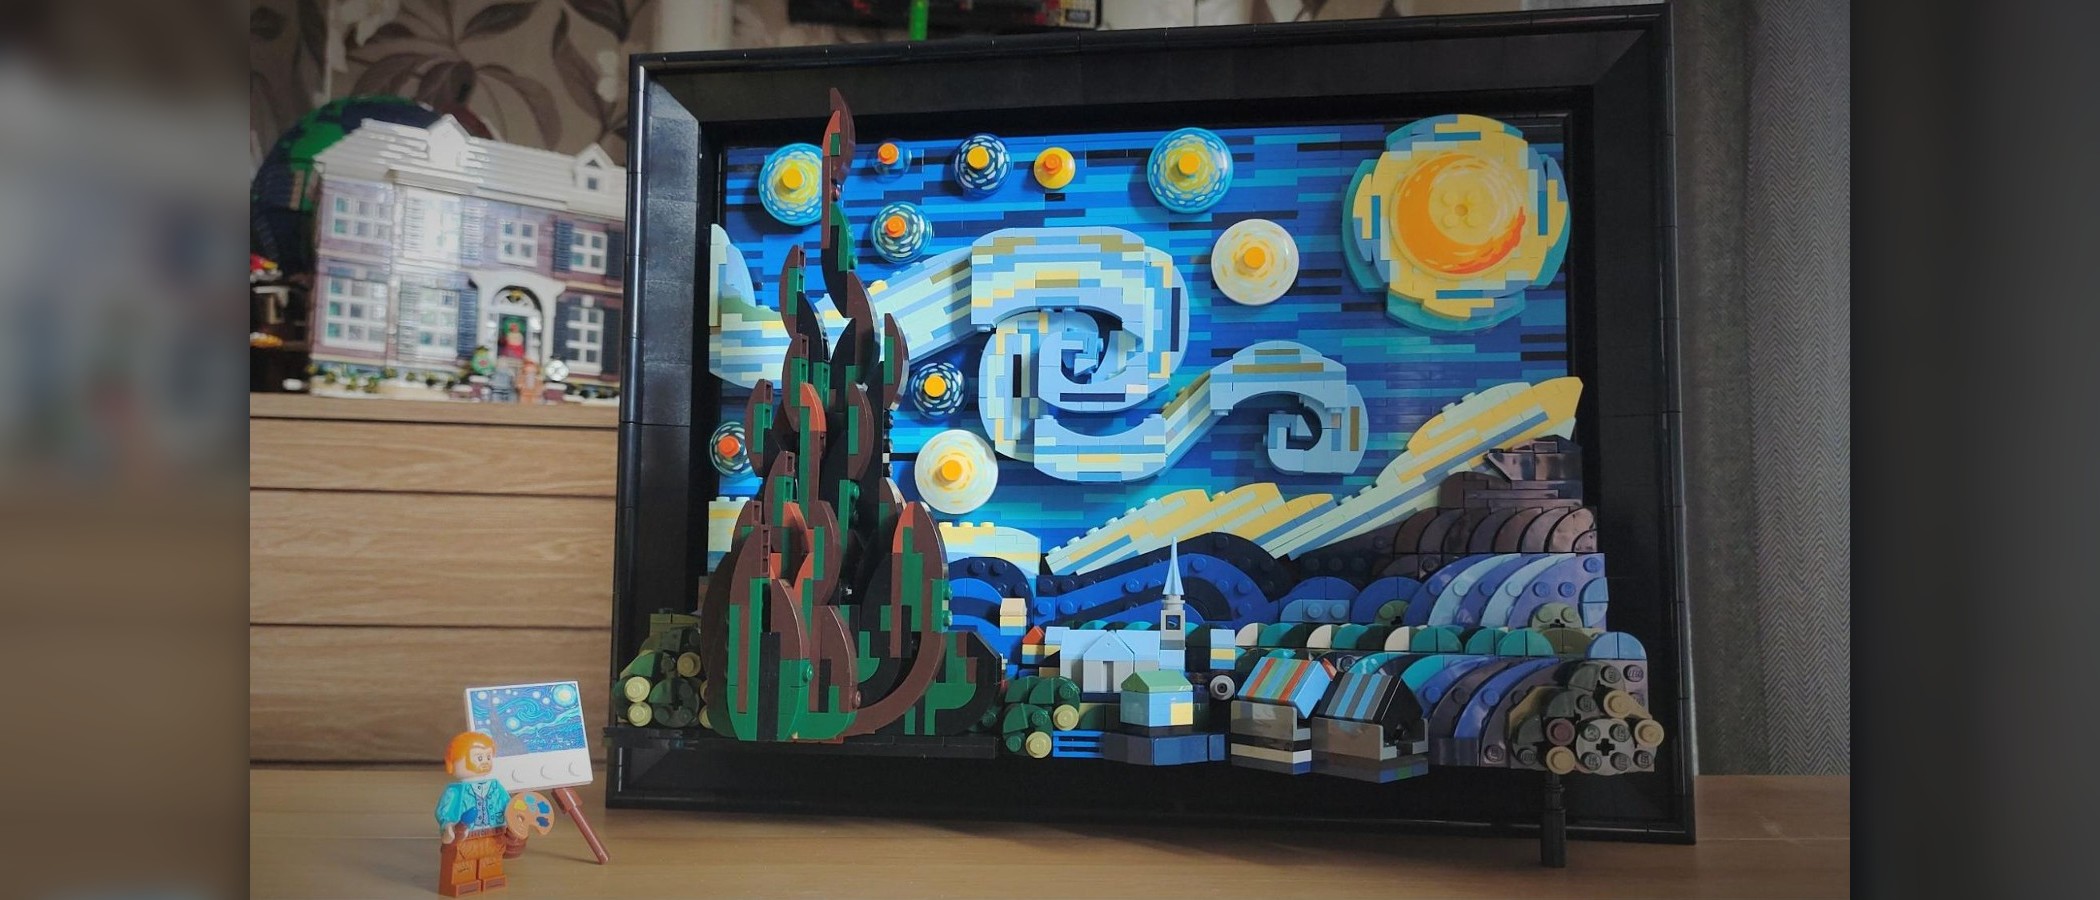 Lego Ideas Vincent van Gogh – The Starry Night review